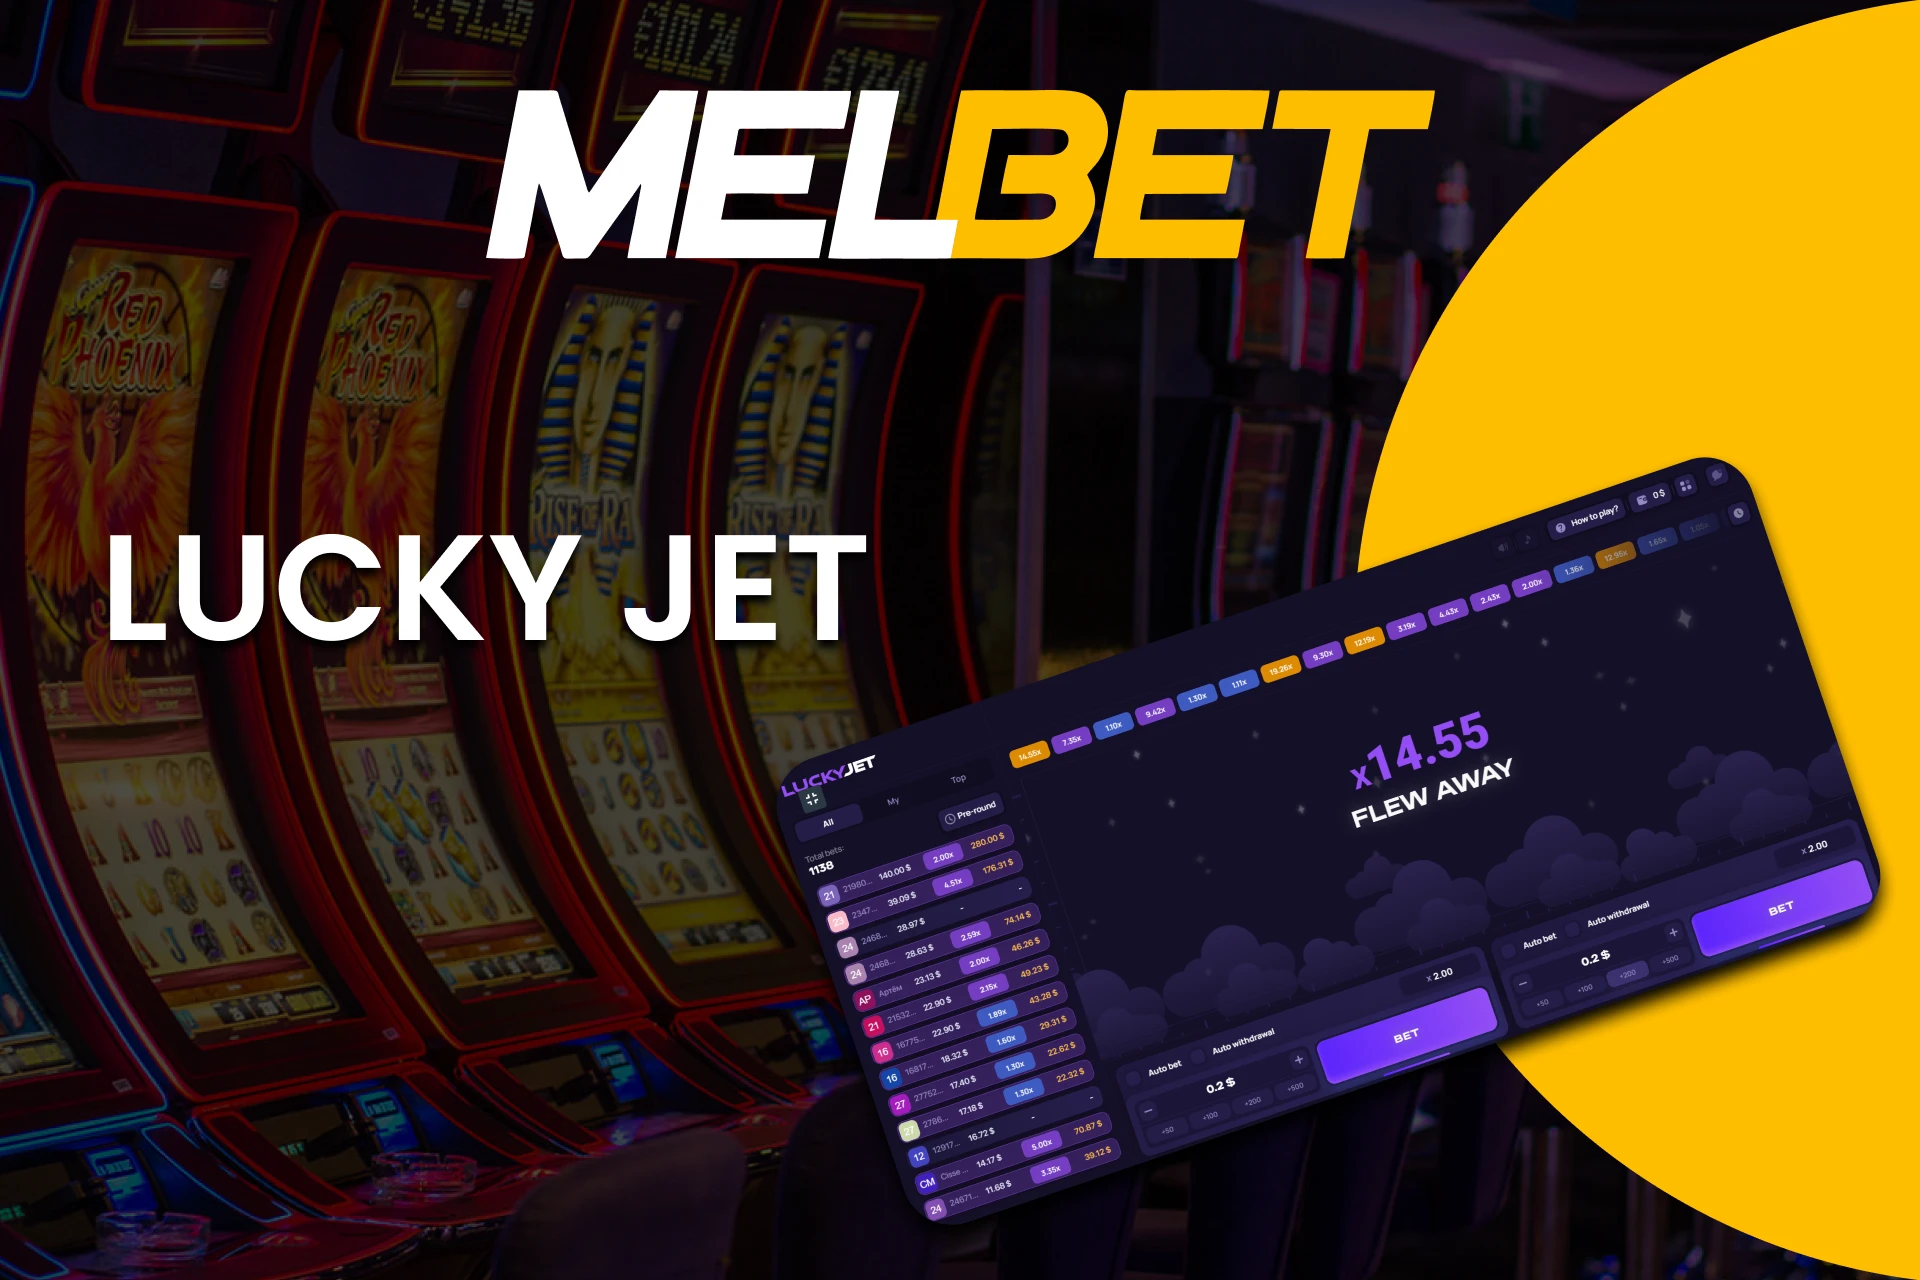 Choose the game Lucky Jet from the Crash section from Melbet.